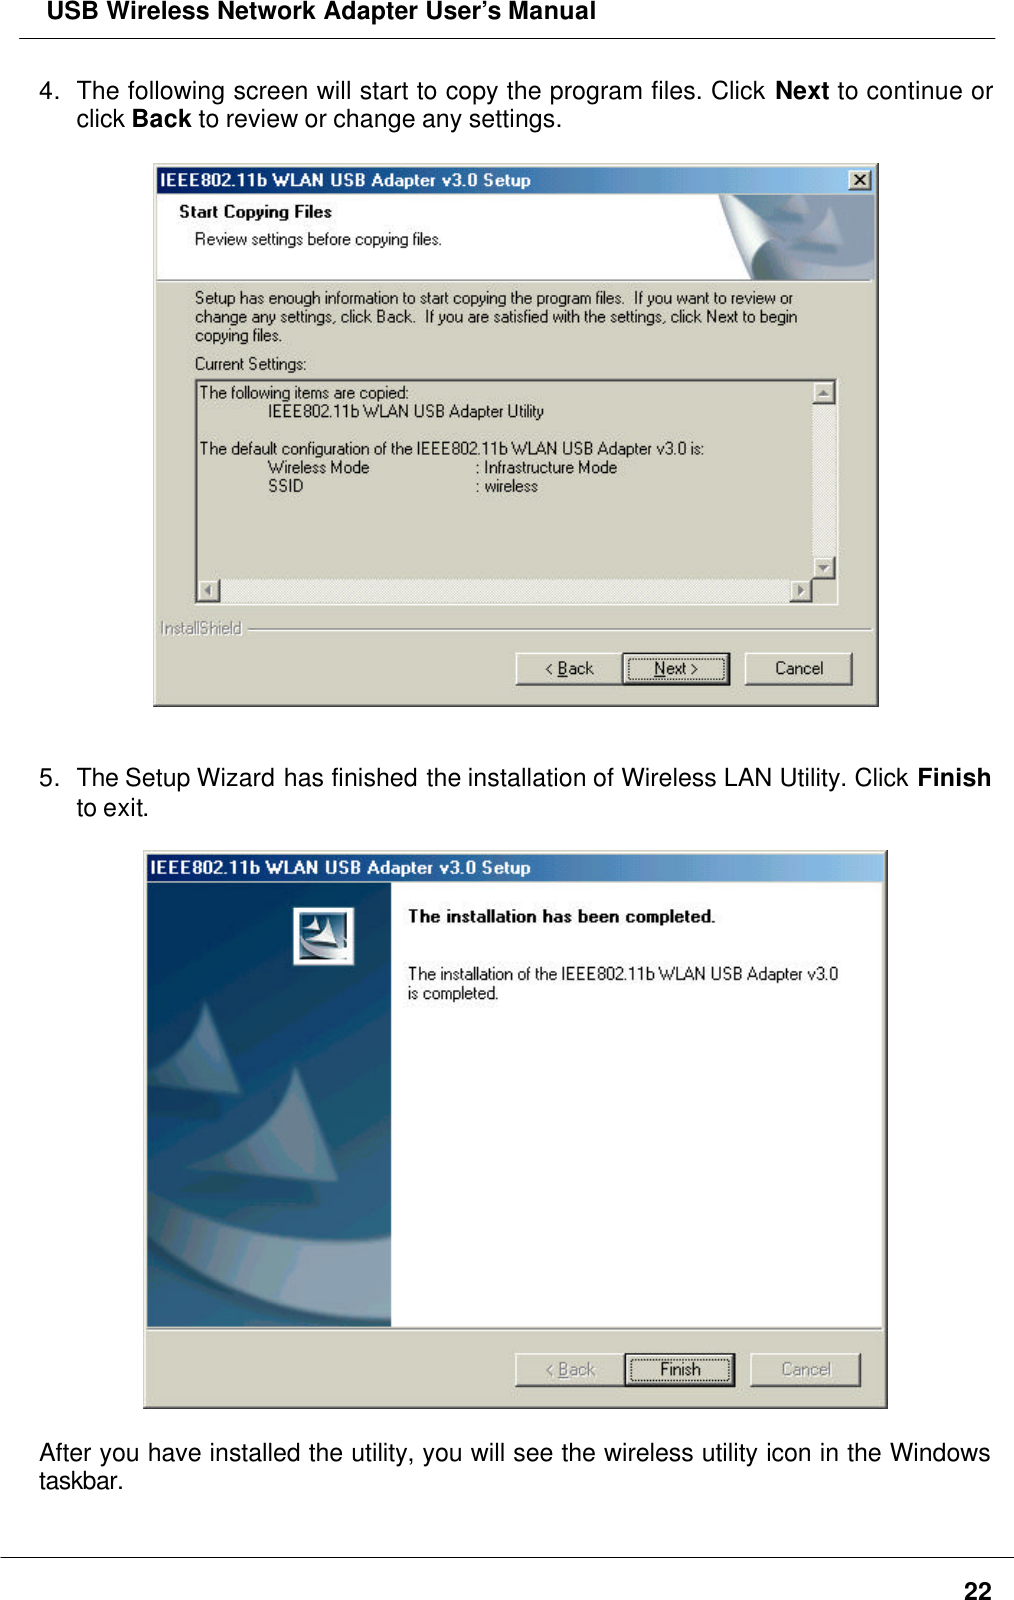  USB Wireless Network Adapter User’s Manual224. The following screen will start to copy the program files. Click Next to continue orclick Back to review or change any settings.5. The Setup Wizard has finished the installation of Wireless LAN Utility. Click Finishto exit.After you have installed the utility, you will see the wireless utility icon in the Windowstaskbar.